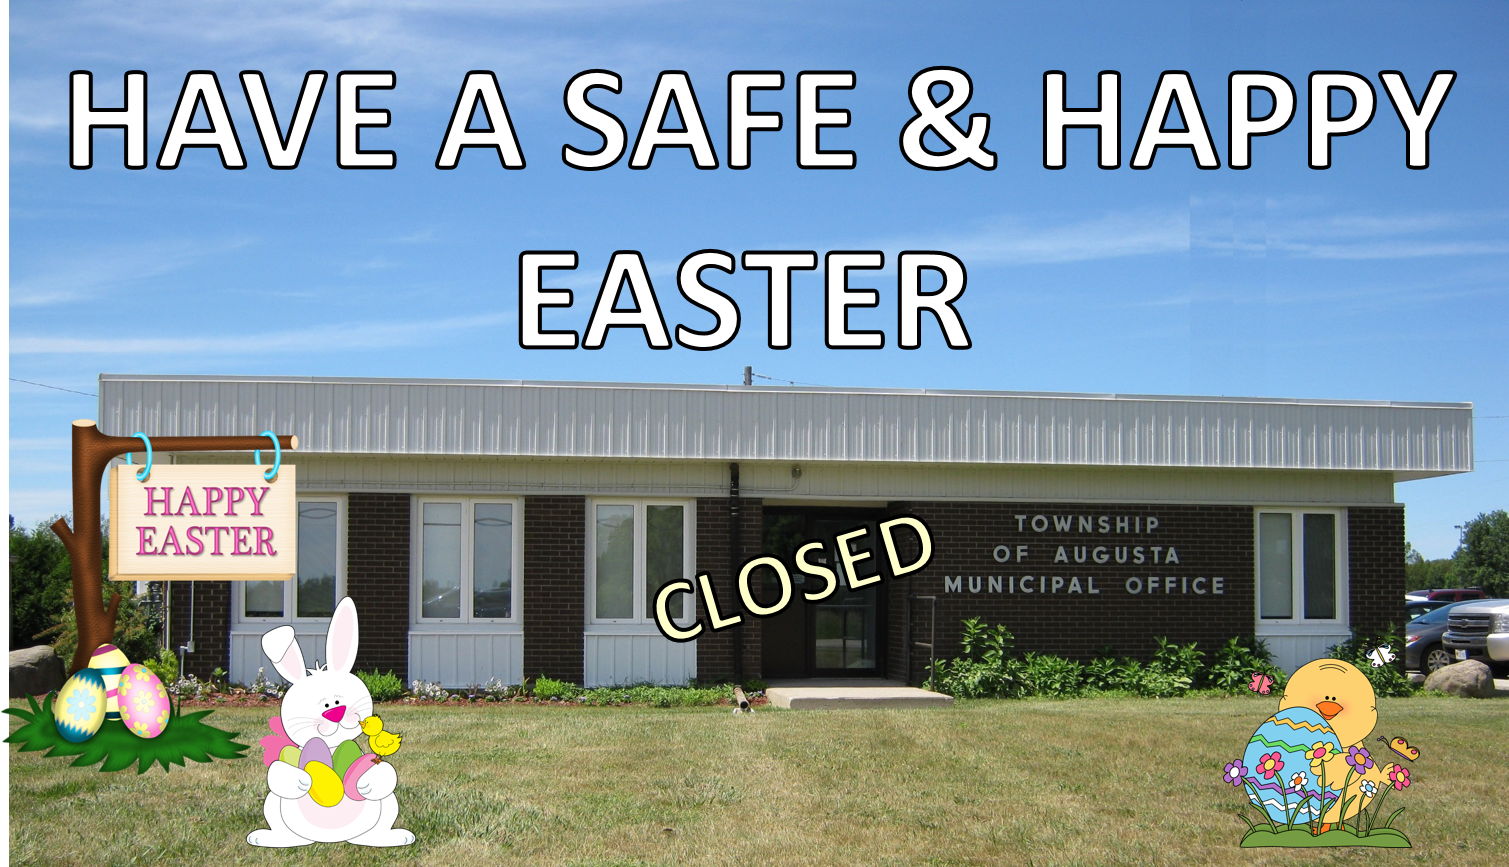 township office with a bunny and chick out front with easter eggs. says have a safe & happy easter